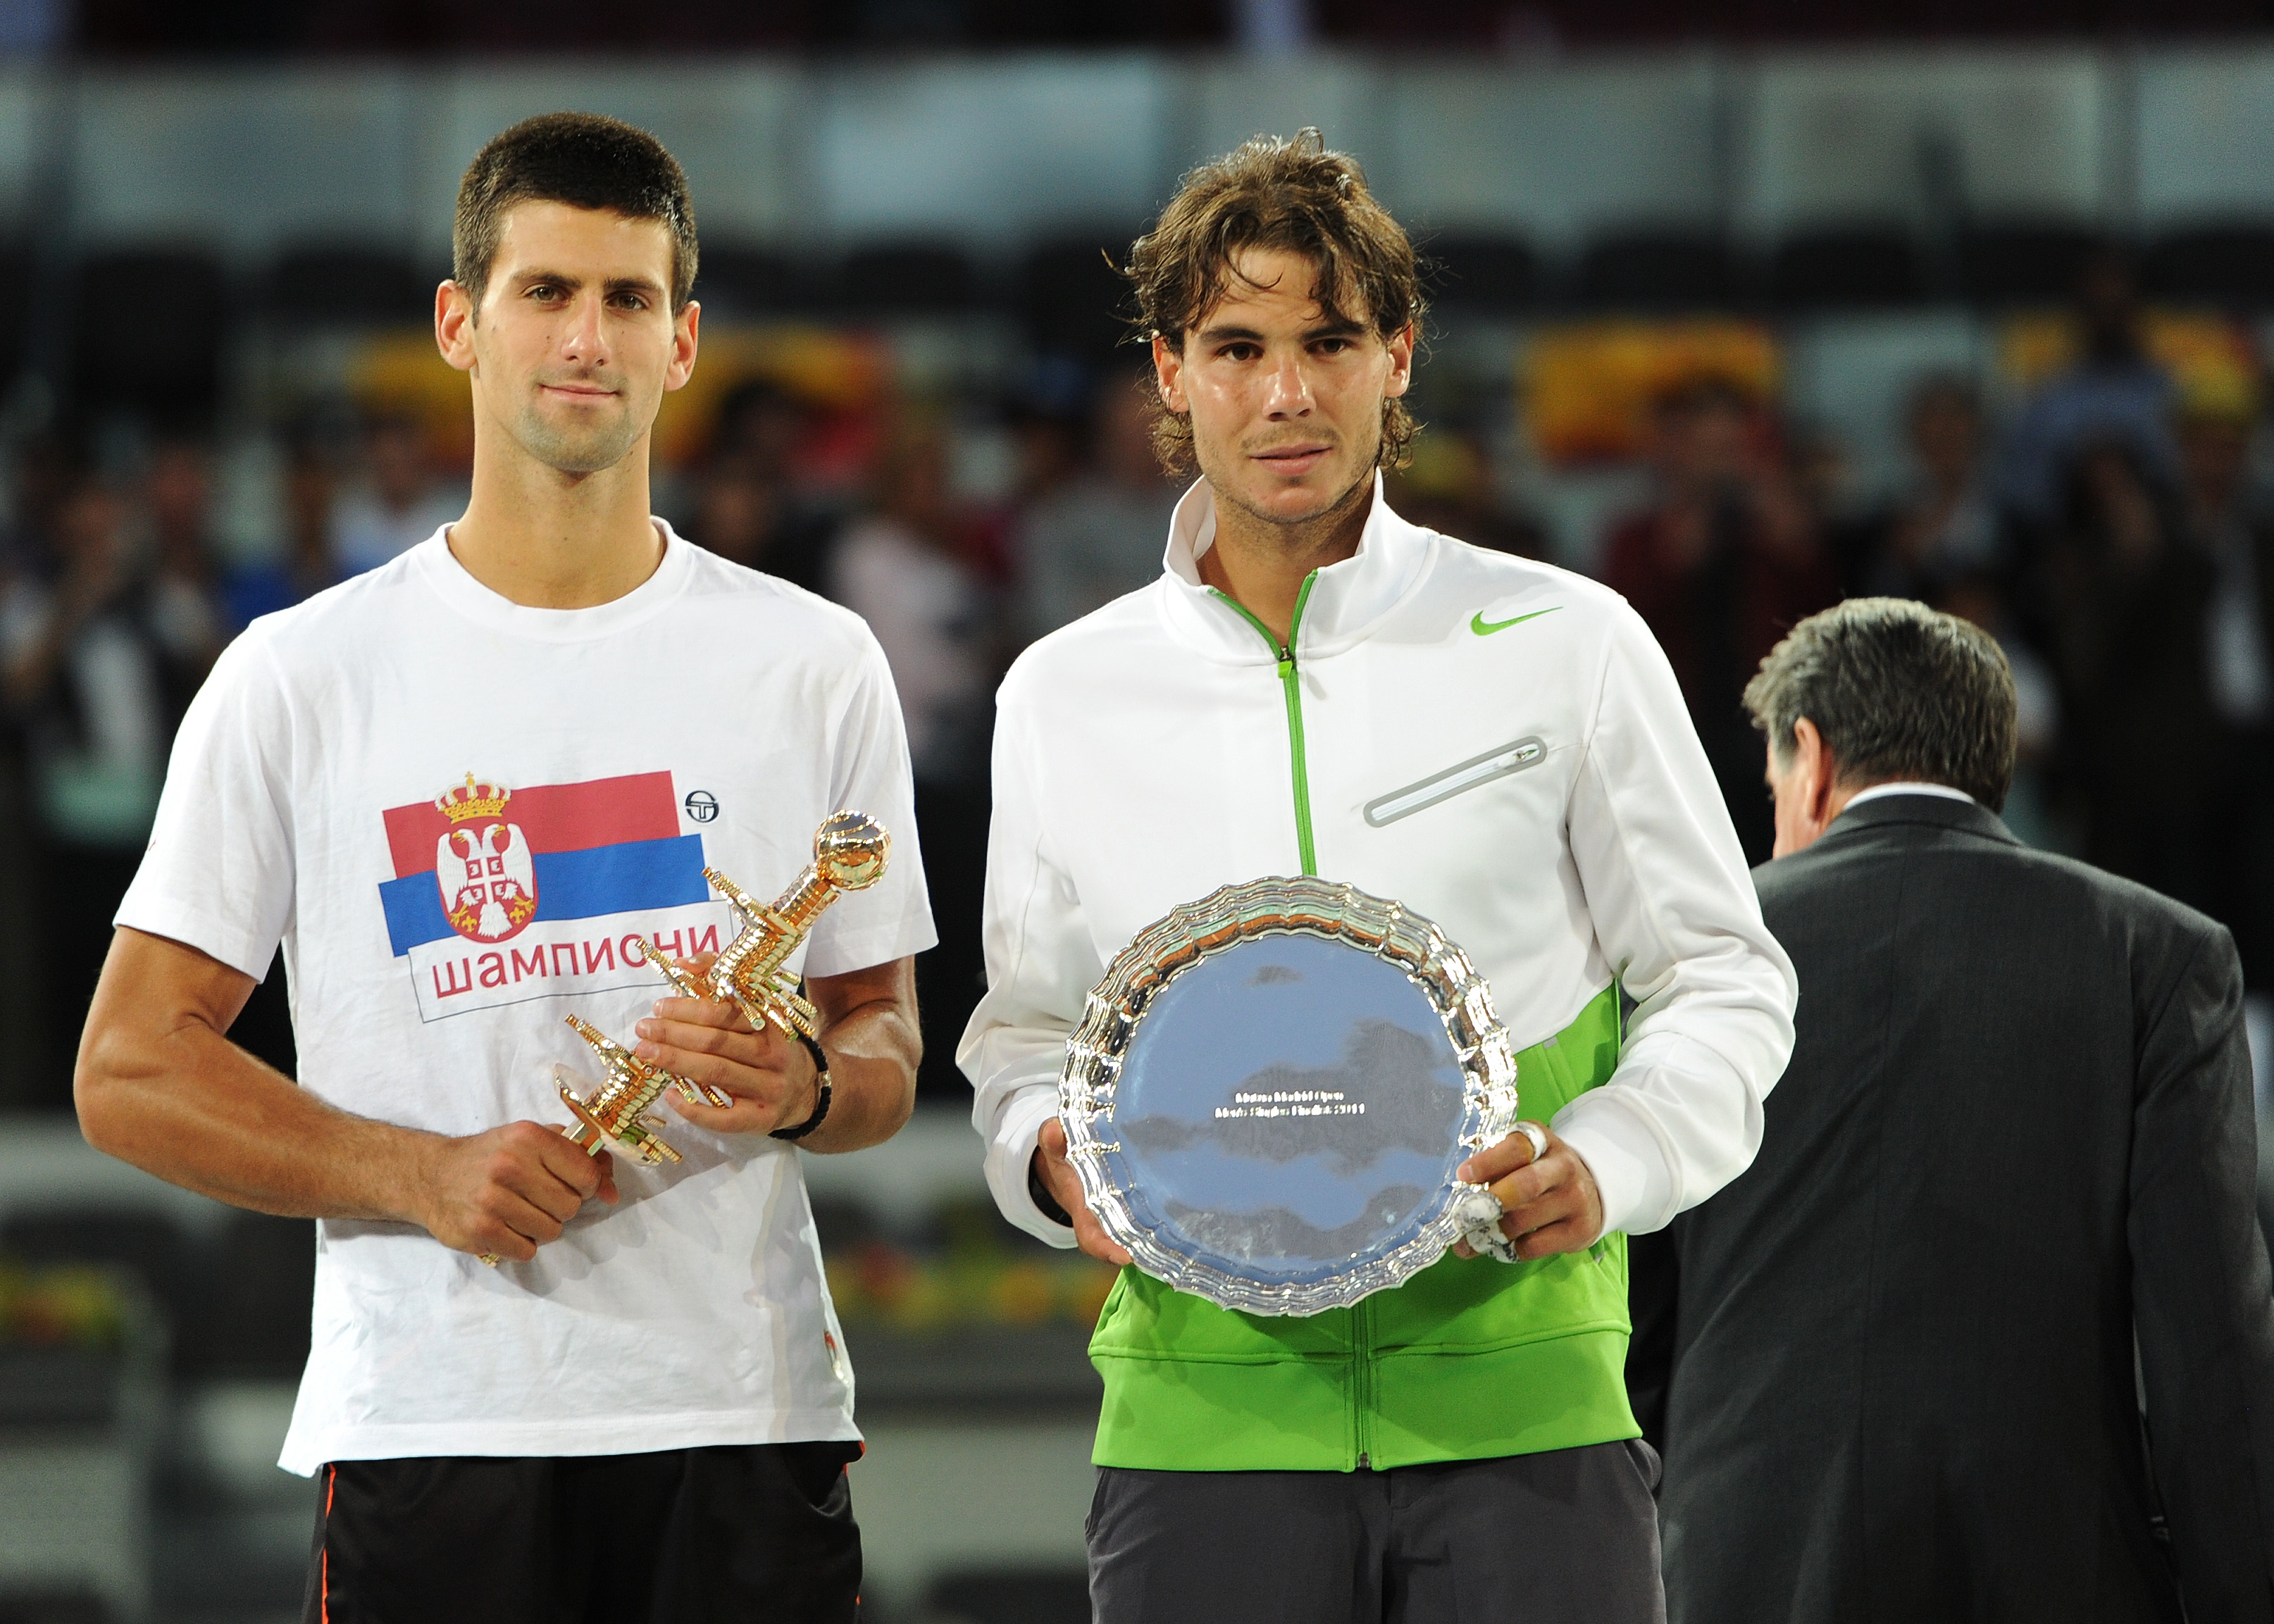 MADRID, SPAIN - MAY 08:  Novak Djokovic (L) of Serbia holds the Ion Tiriac's trophy besides runner up Rafael Nadal of Spain during the price giving ceremony on day eight of the Mutua Madrilena Madrid Open Tennis on May 8, 2011 in Madrid, Spain.  (Photo by